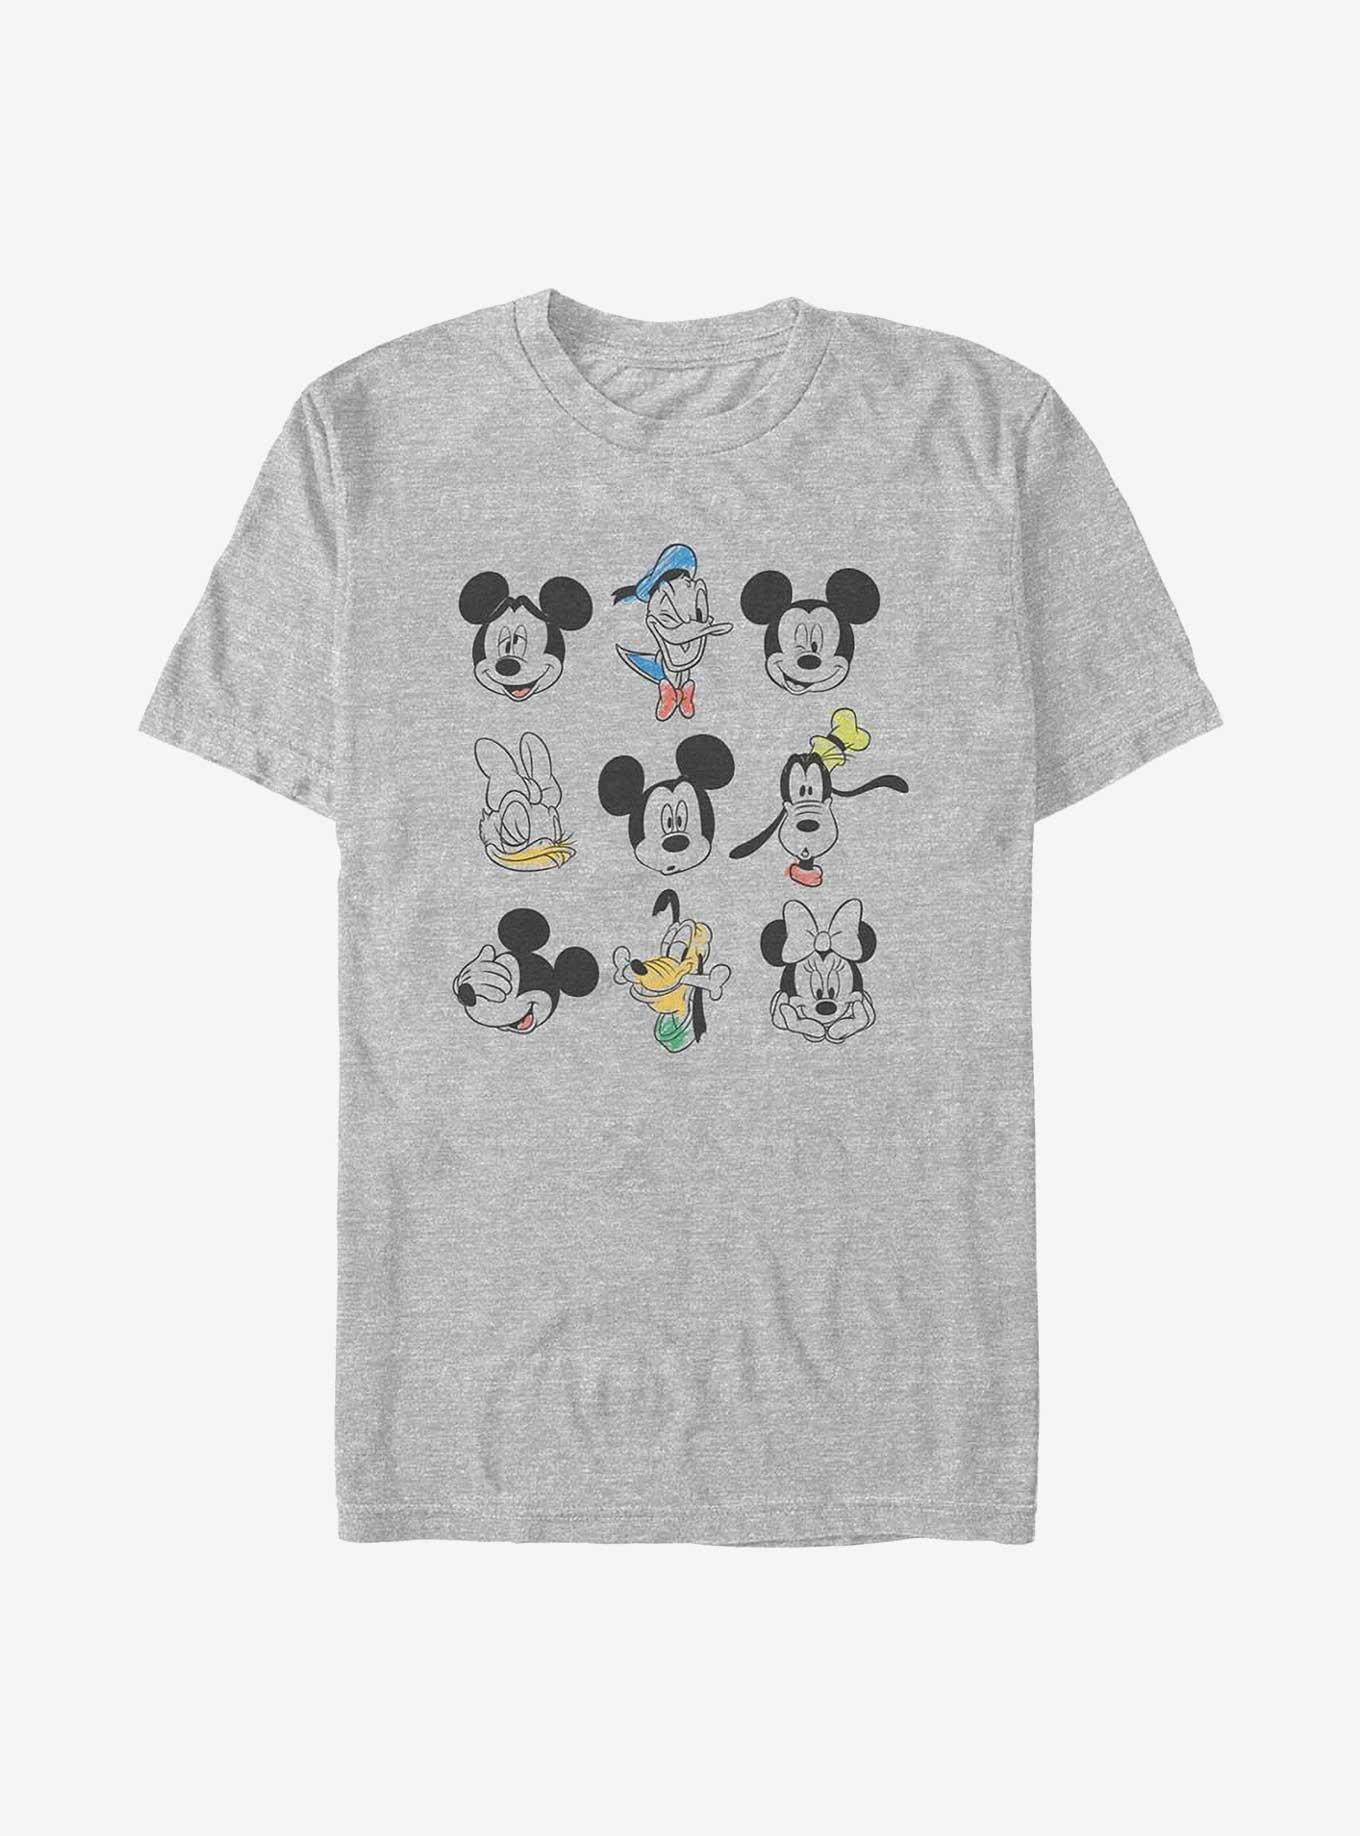 Disney Mickey Mouse Friends Faces T-Shirt, ATH HTR, hi-res